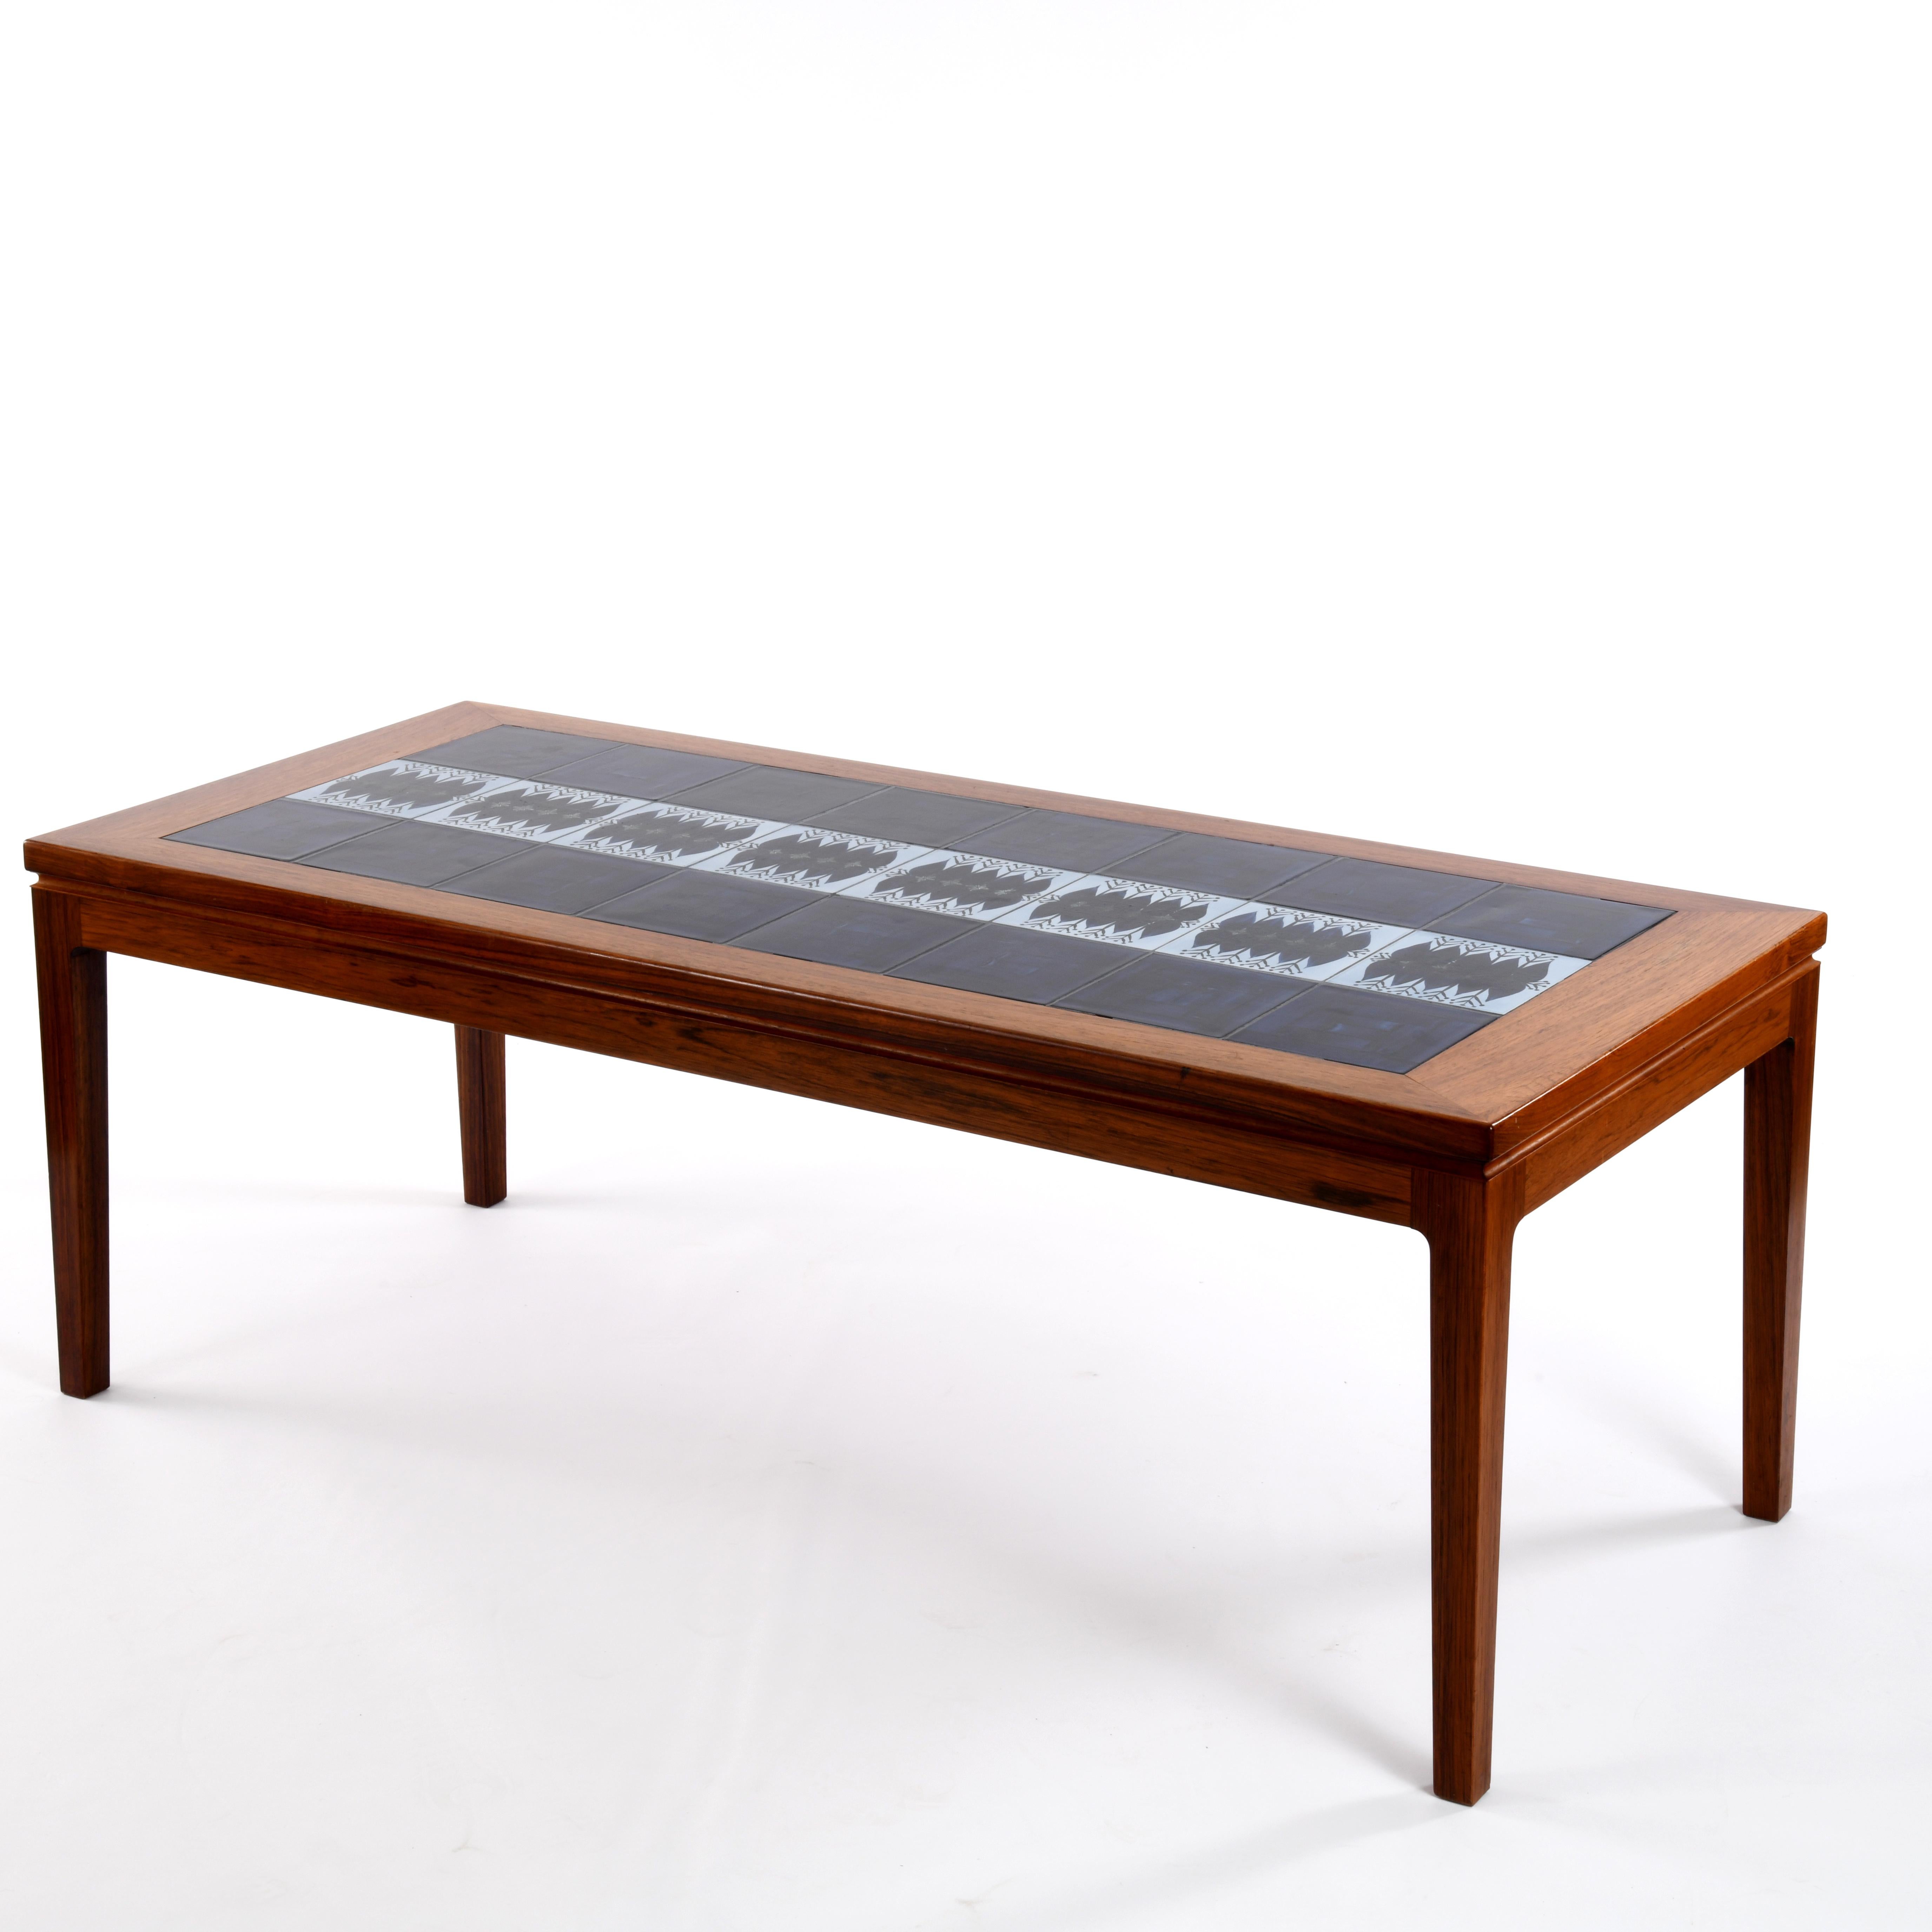 Large coffee table in walnut and ceramic tiles, made in Denmark in the 1950s-60s. It is in very good condition, with beautiful work on the wood surround with an all-round gutter and rounding at the top of the legs in conjunction with the top. The